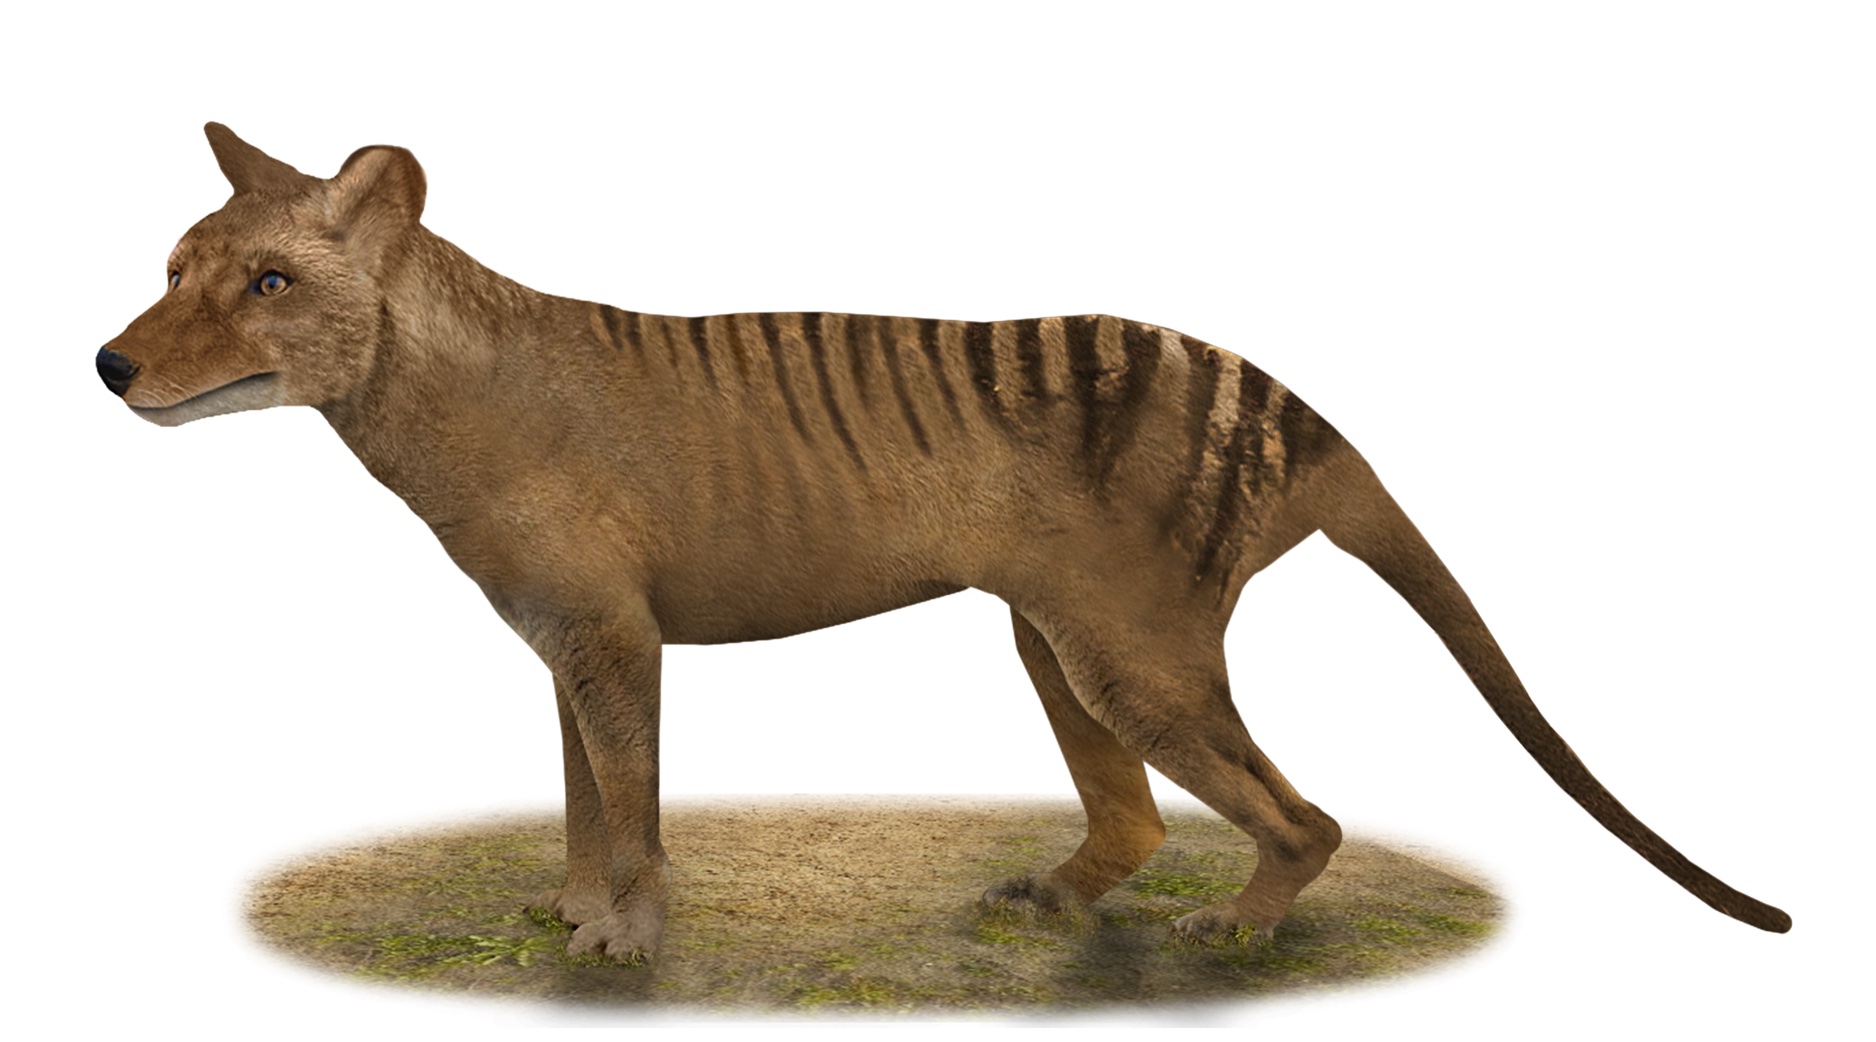 Tasmanian tiger - The remains of the last thylacine were in a closet

